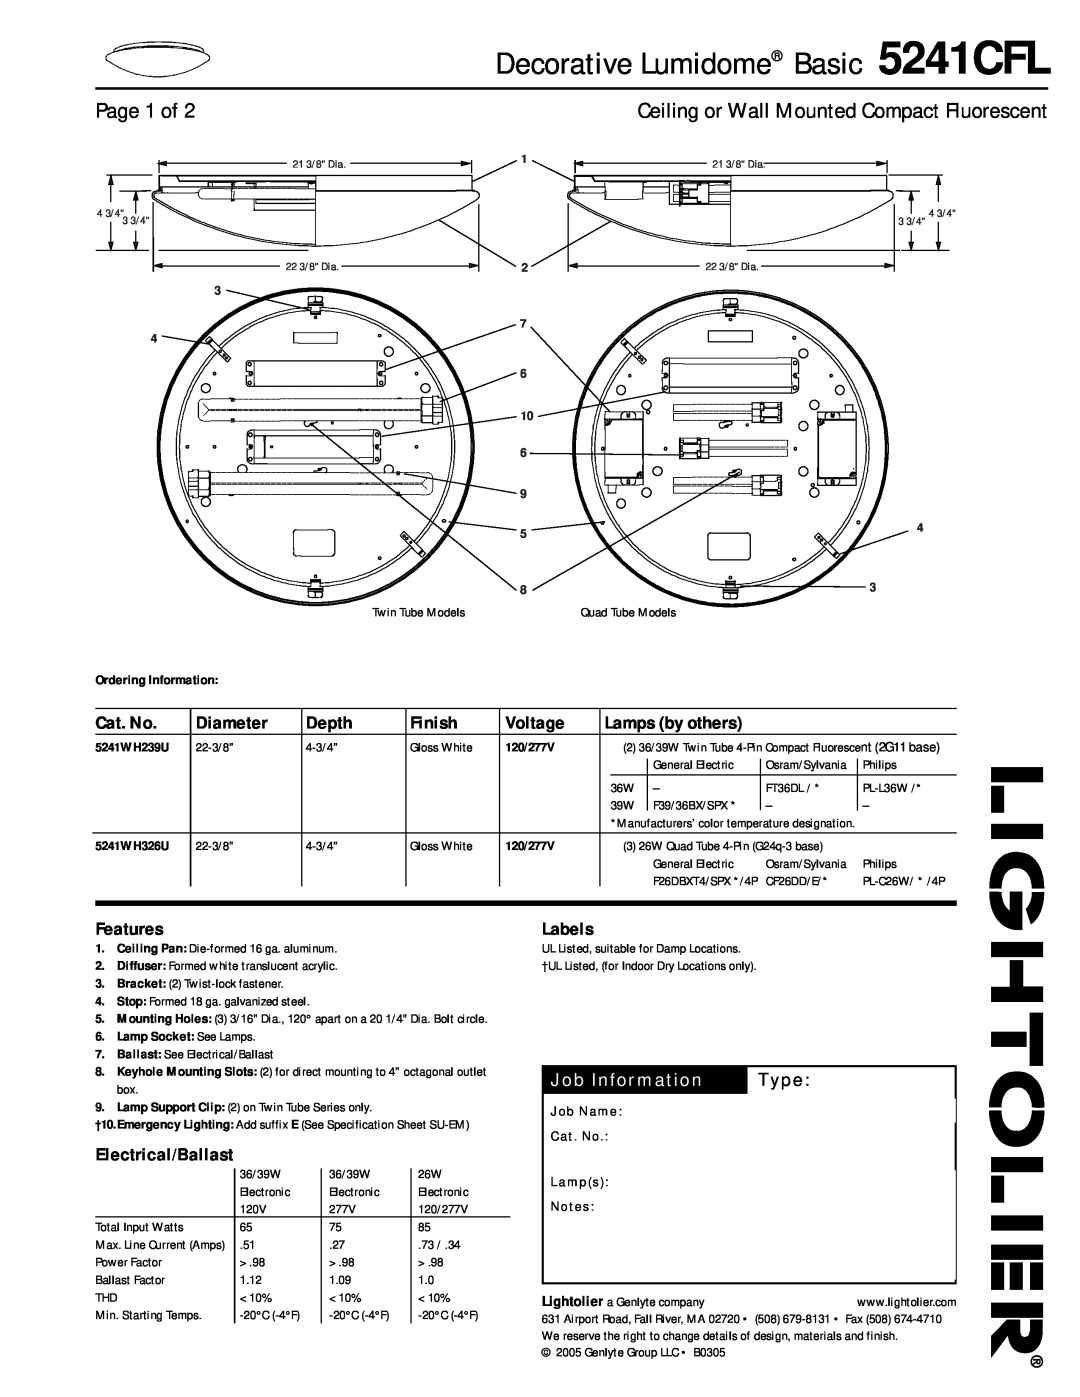 Lightolier specifications Decorative Lumidome Basic 5241CFL, Page 1 of, Ceiling or Wall Mounted Compact Fluorescent 